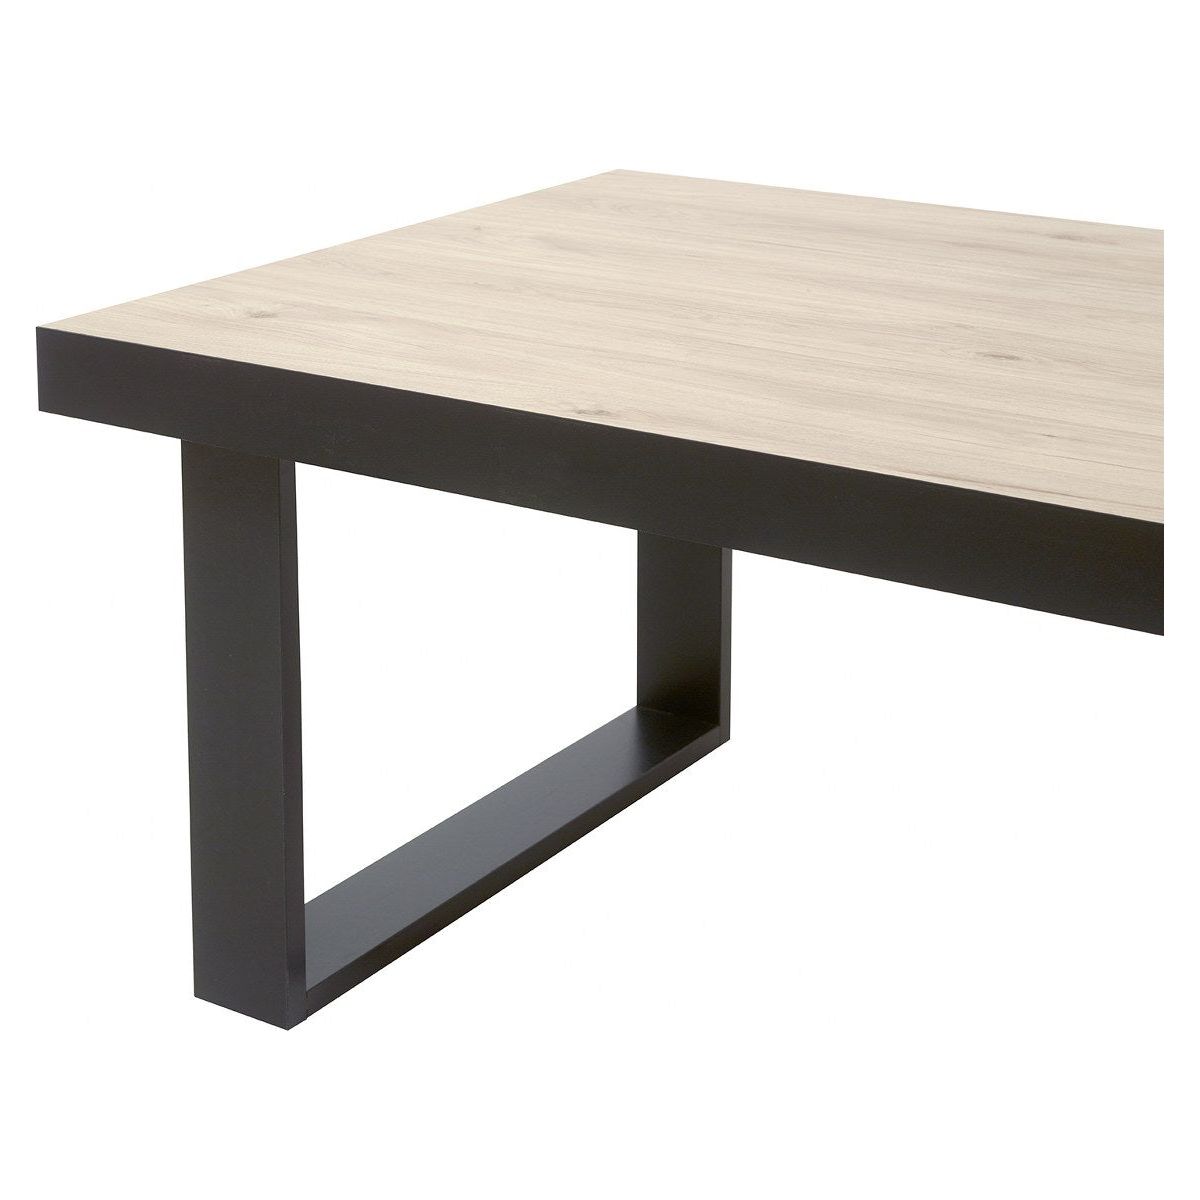 Coffee table | Furniture series Dylan | natural, black | 130x68x